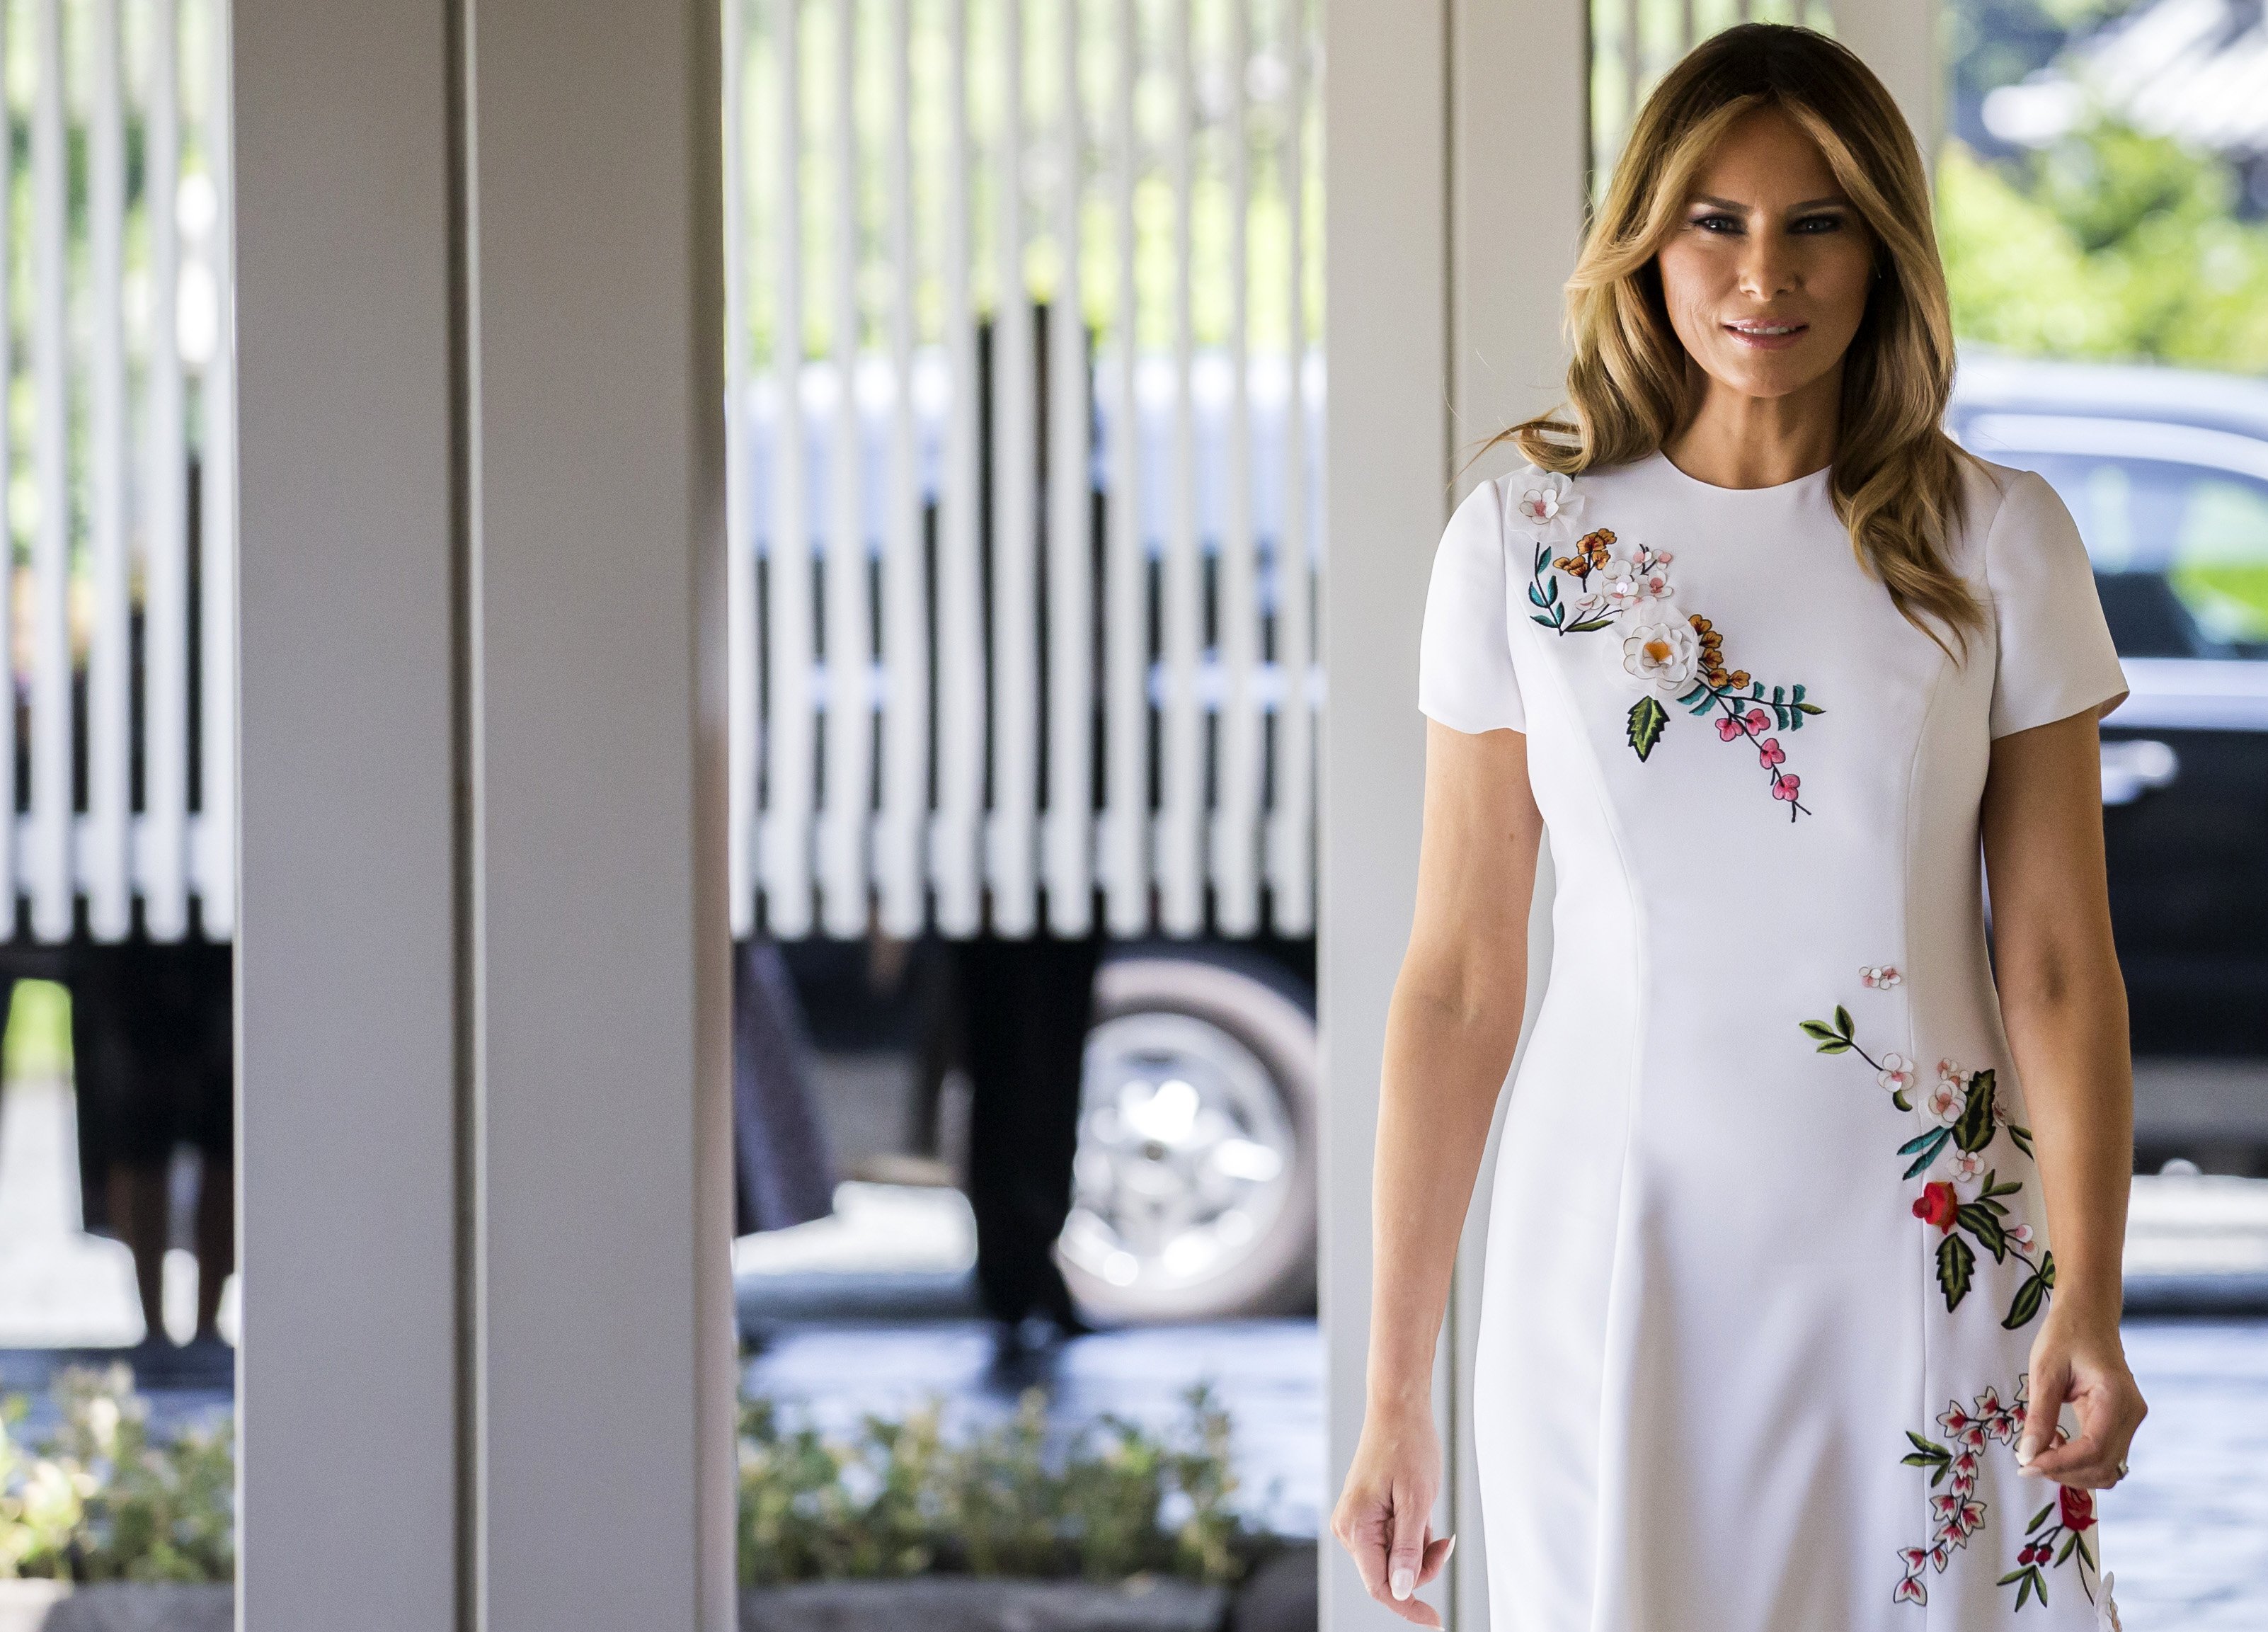 Melania Trump at the State Guest House in Tokyo, Japan | Photo: Getty Images